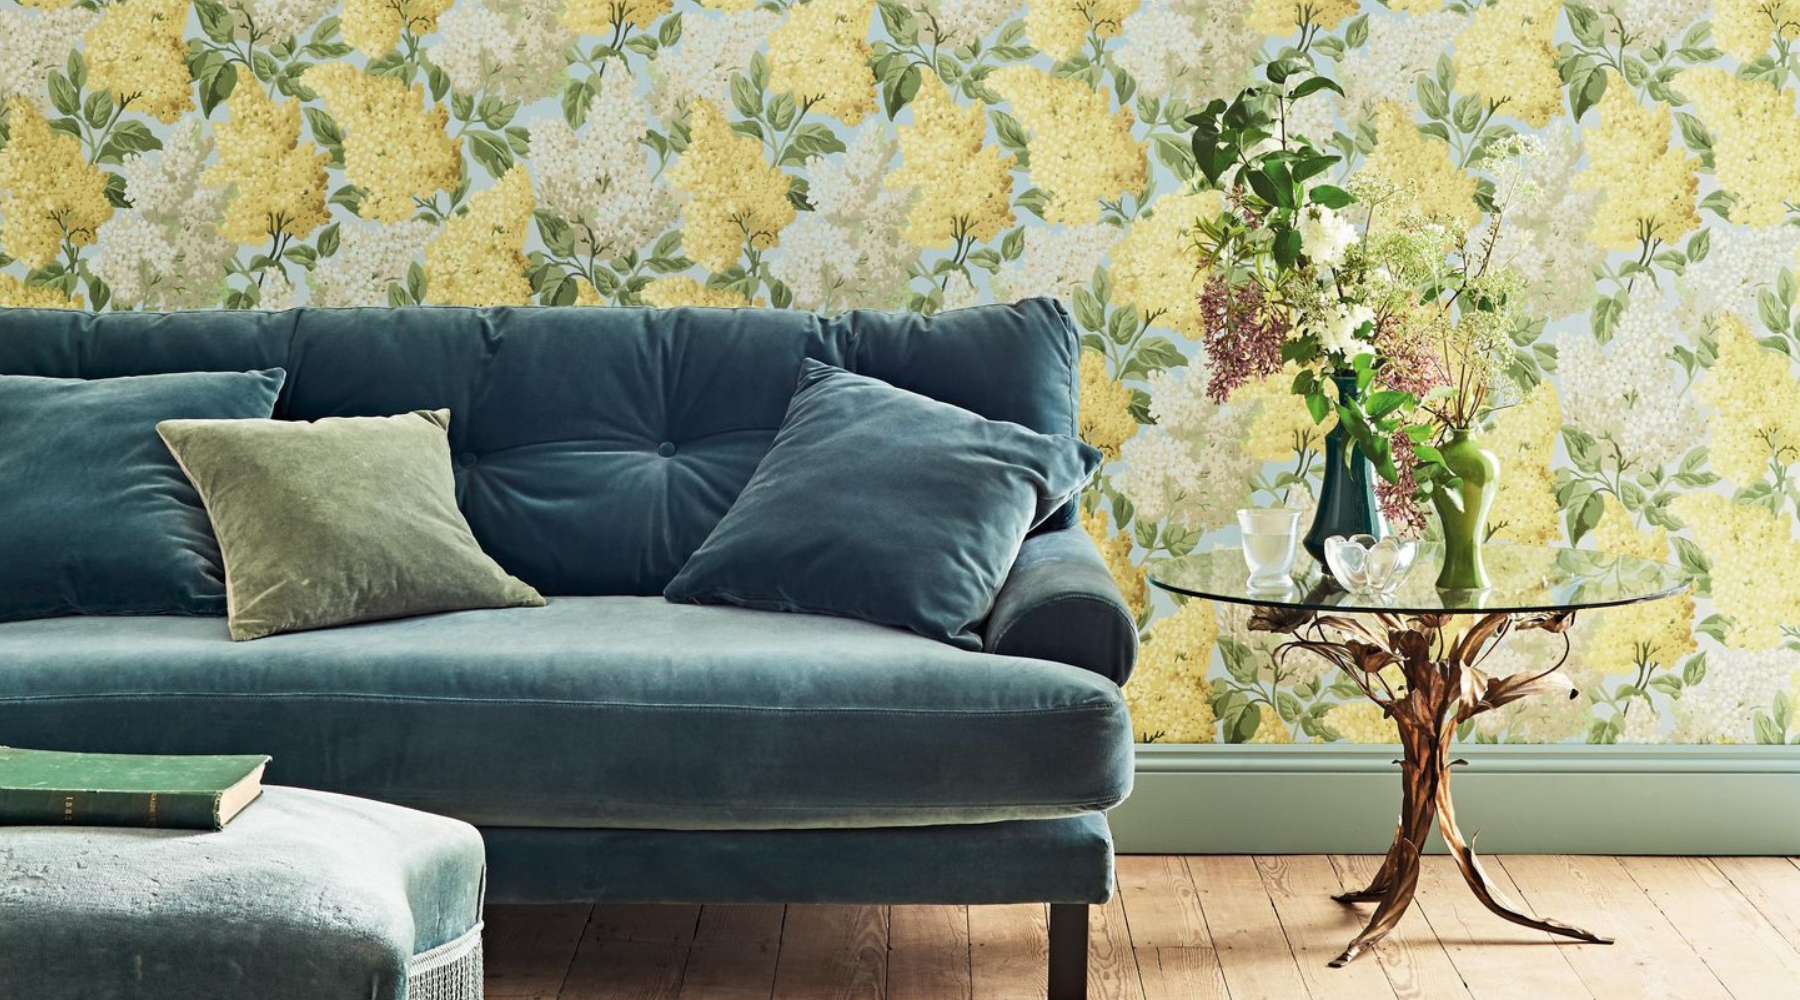 Picking the perfect floral wallpaper